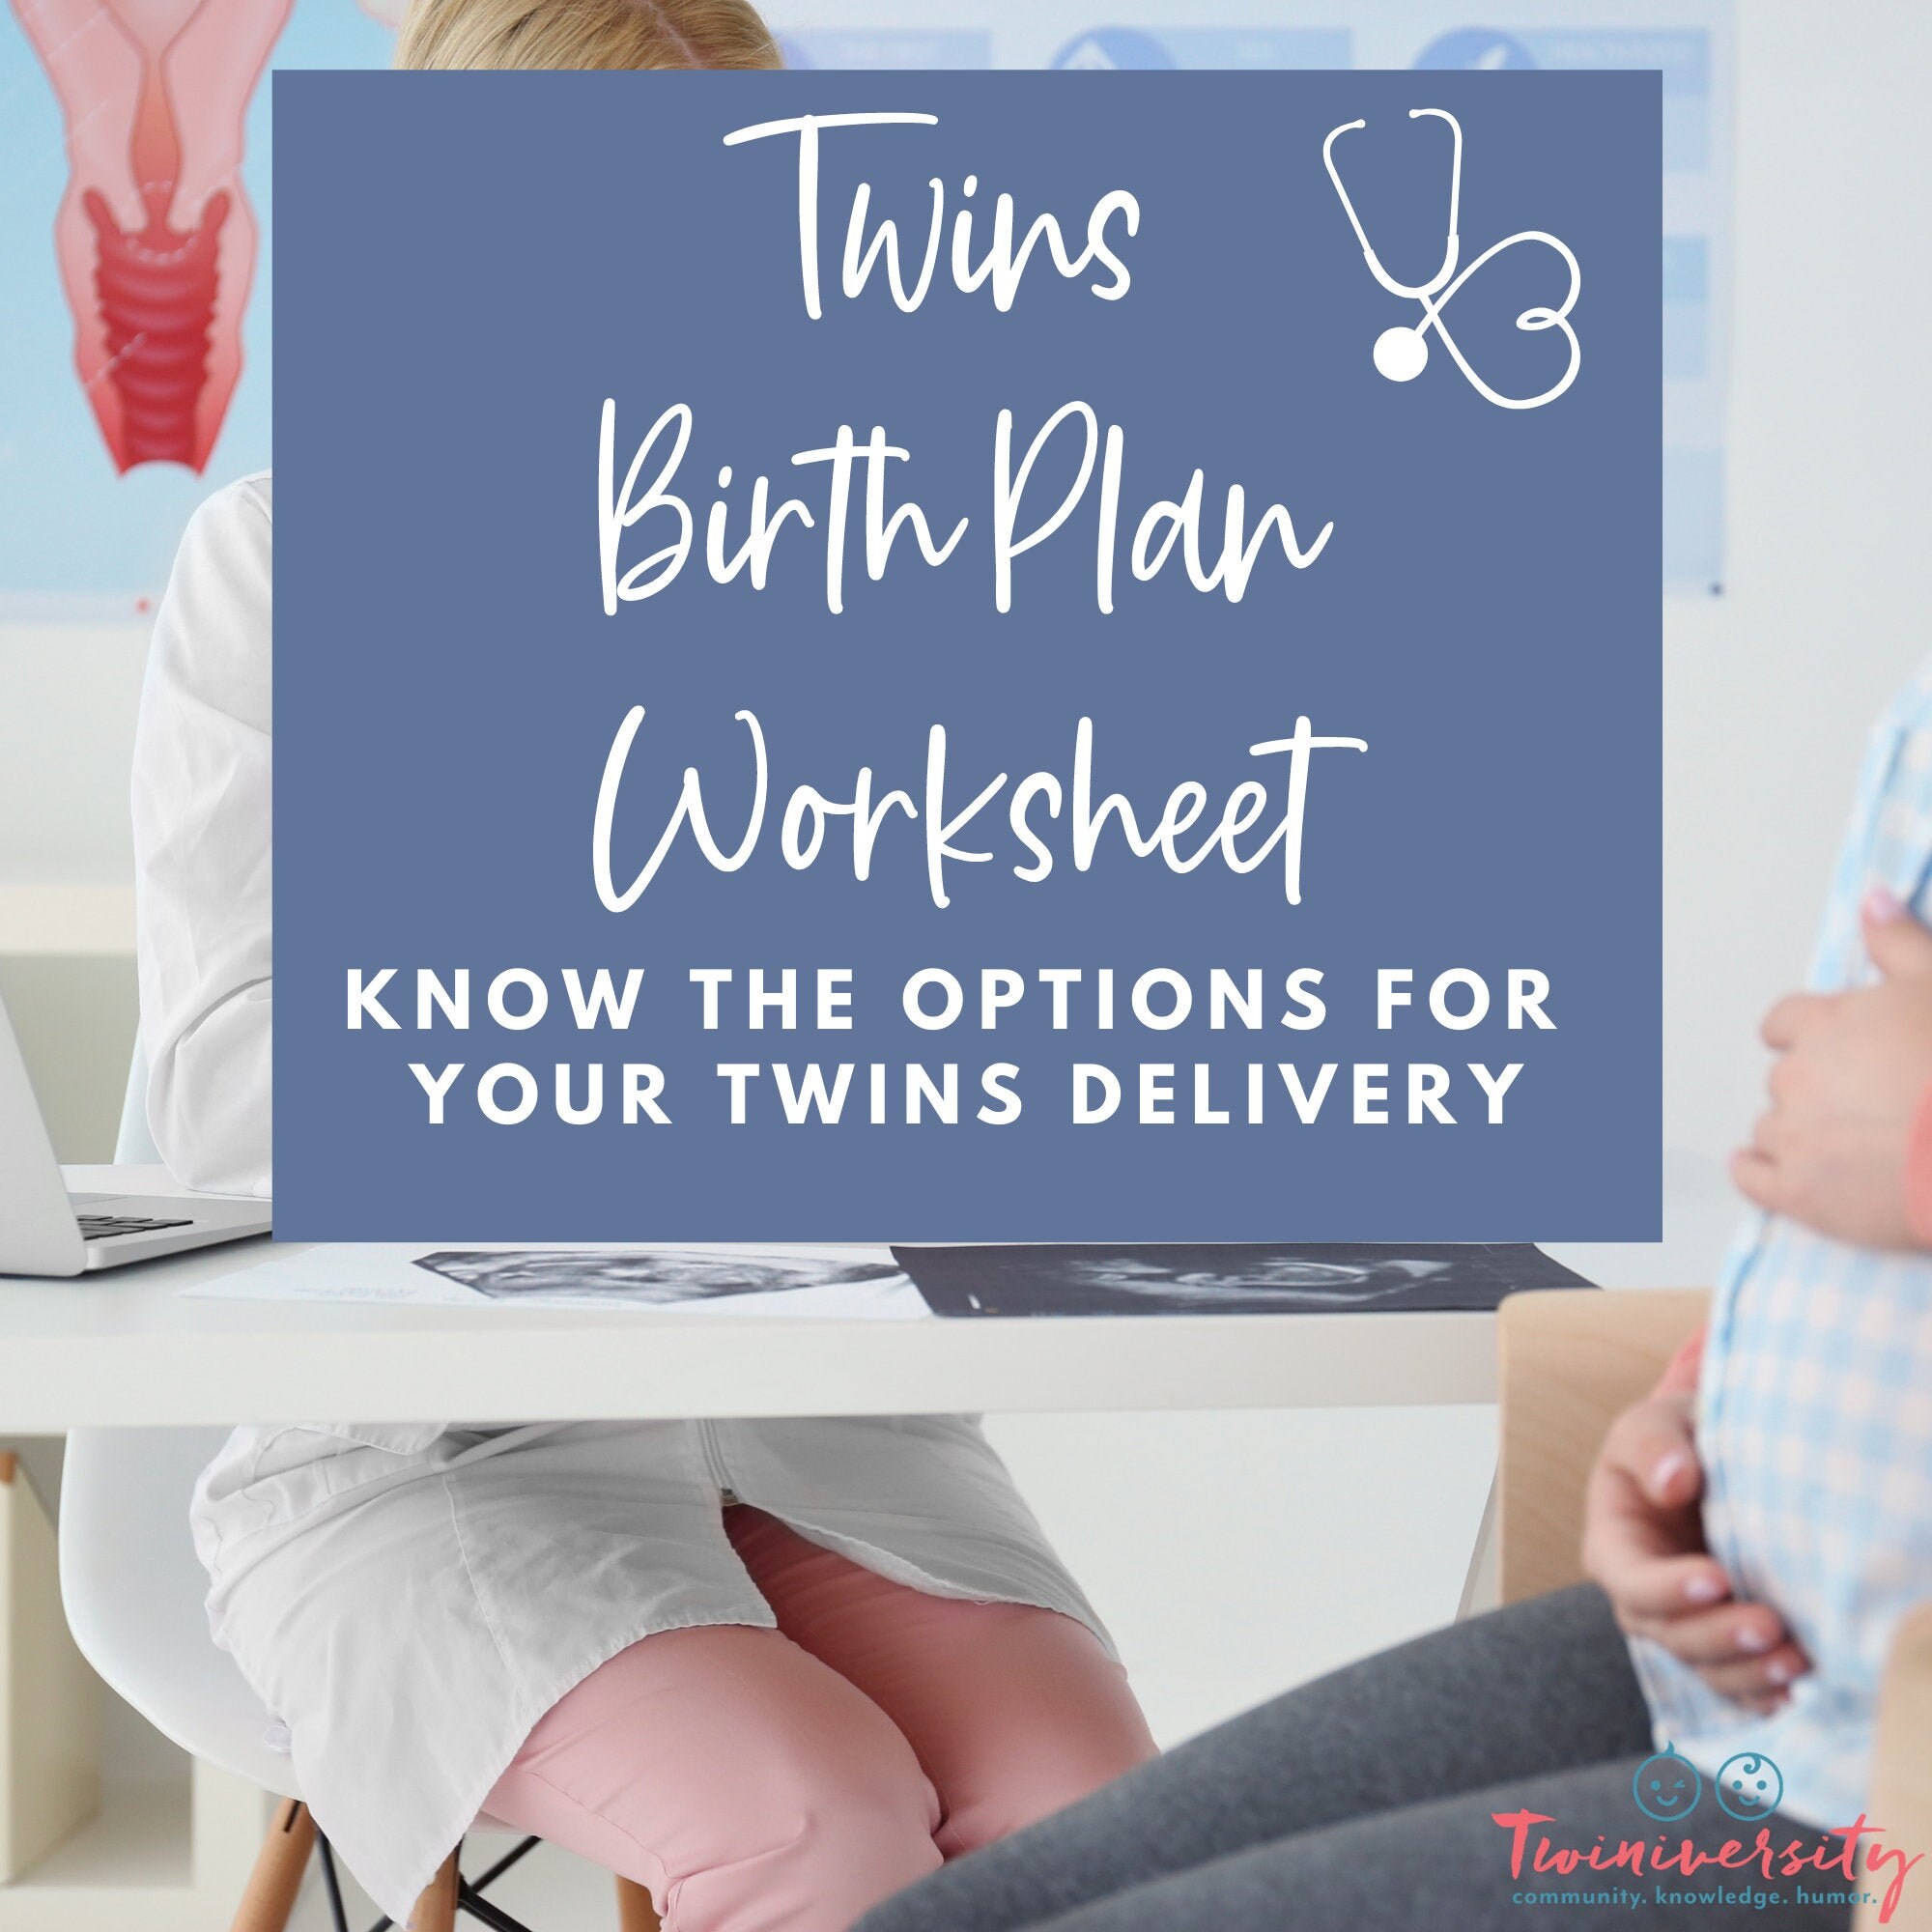 13 Items You Must Have to Organize Your Twins' Toys - Twiniversity